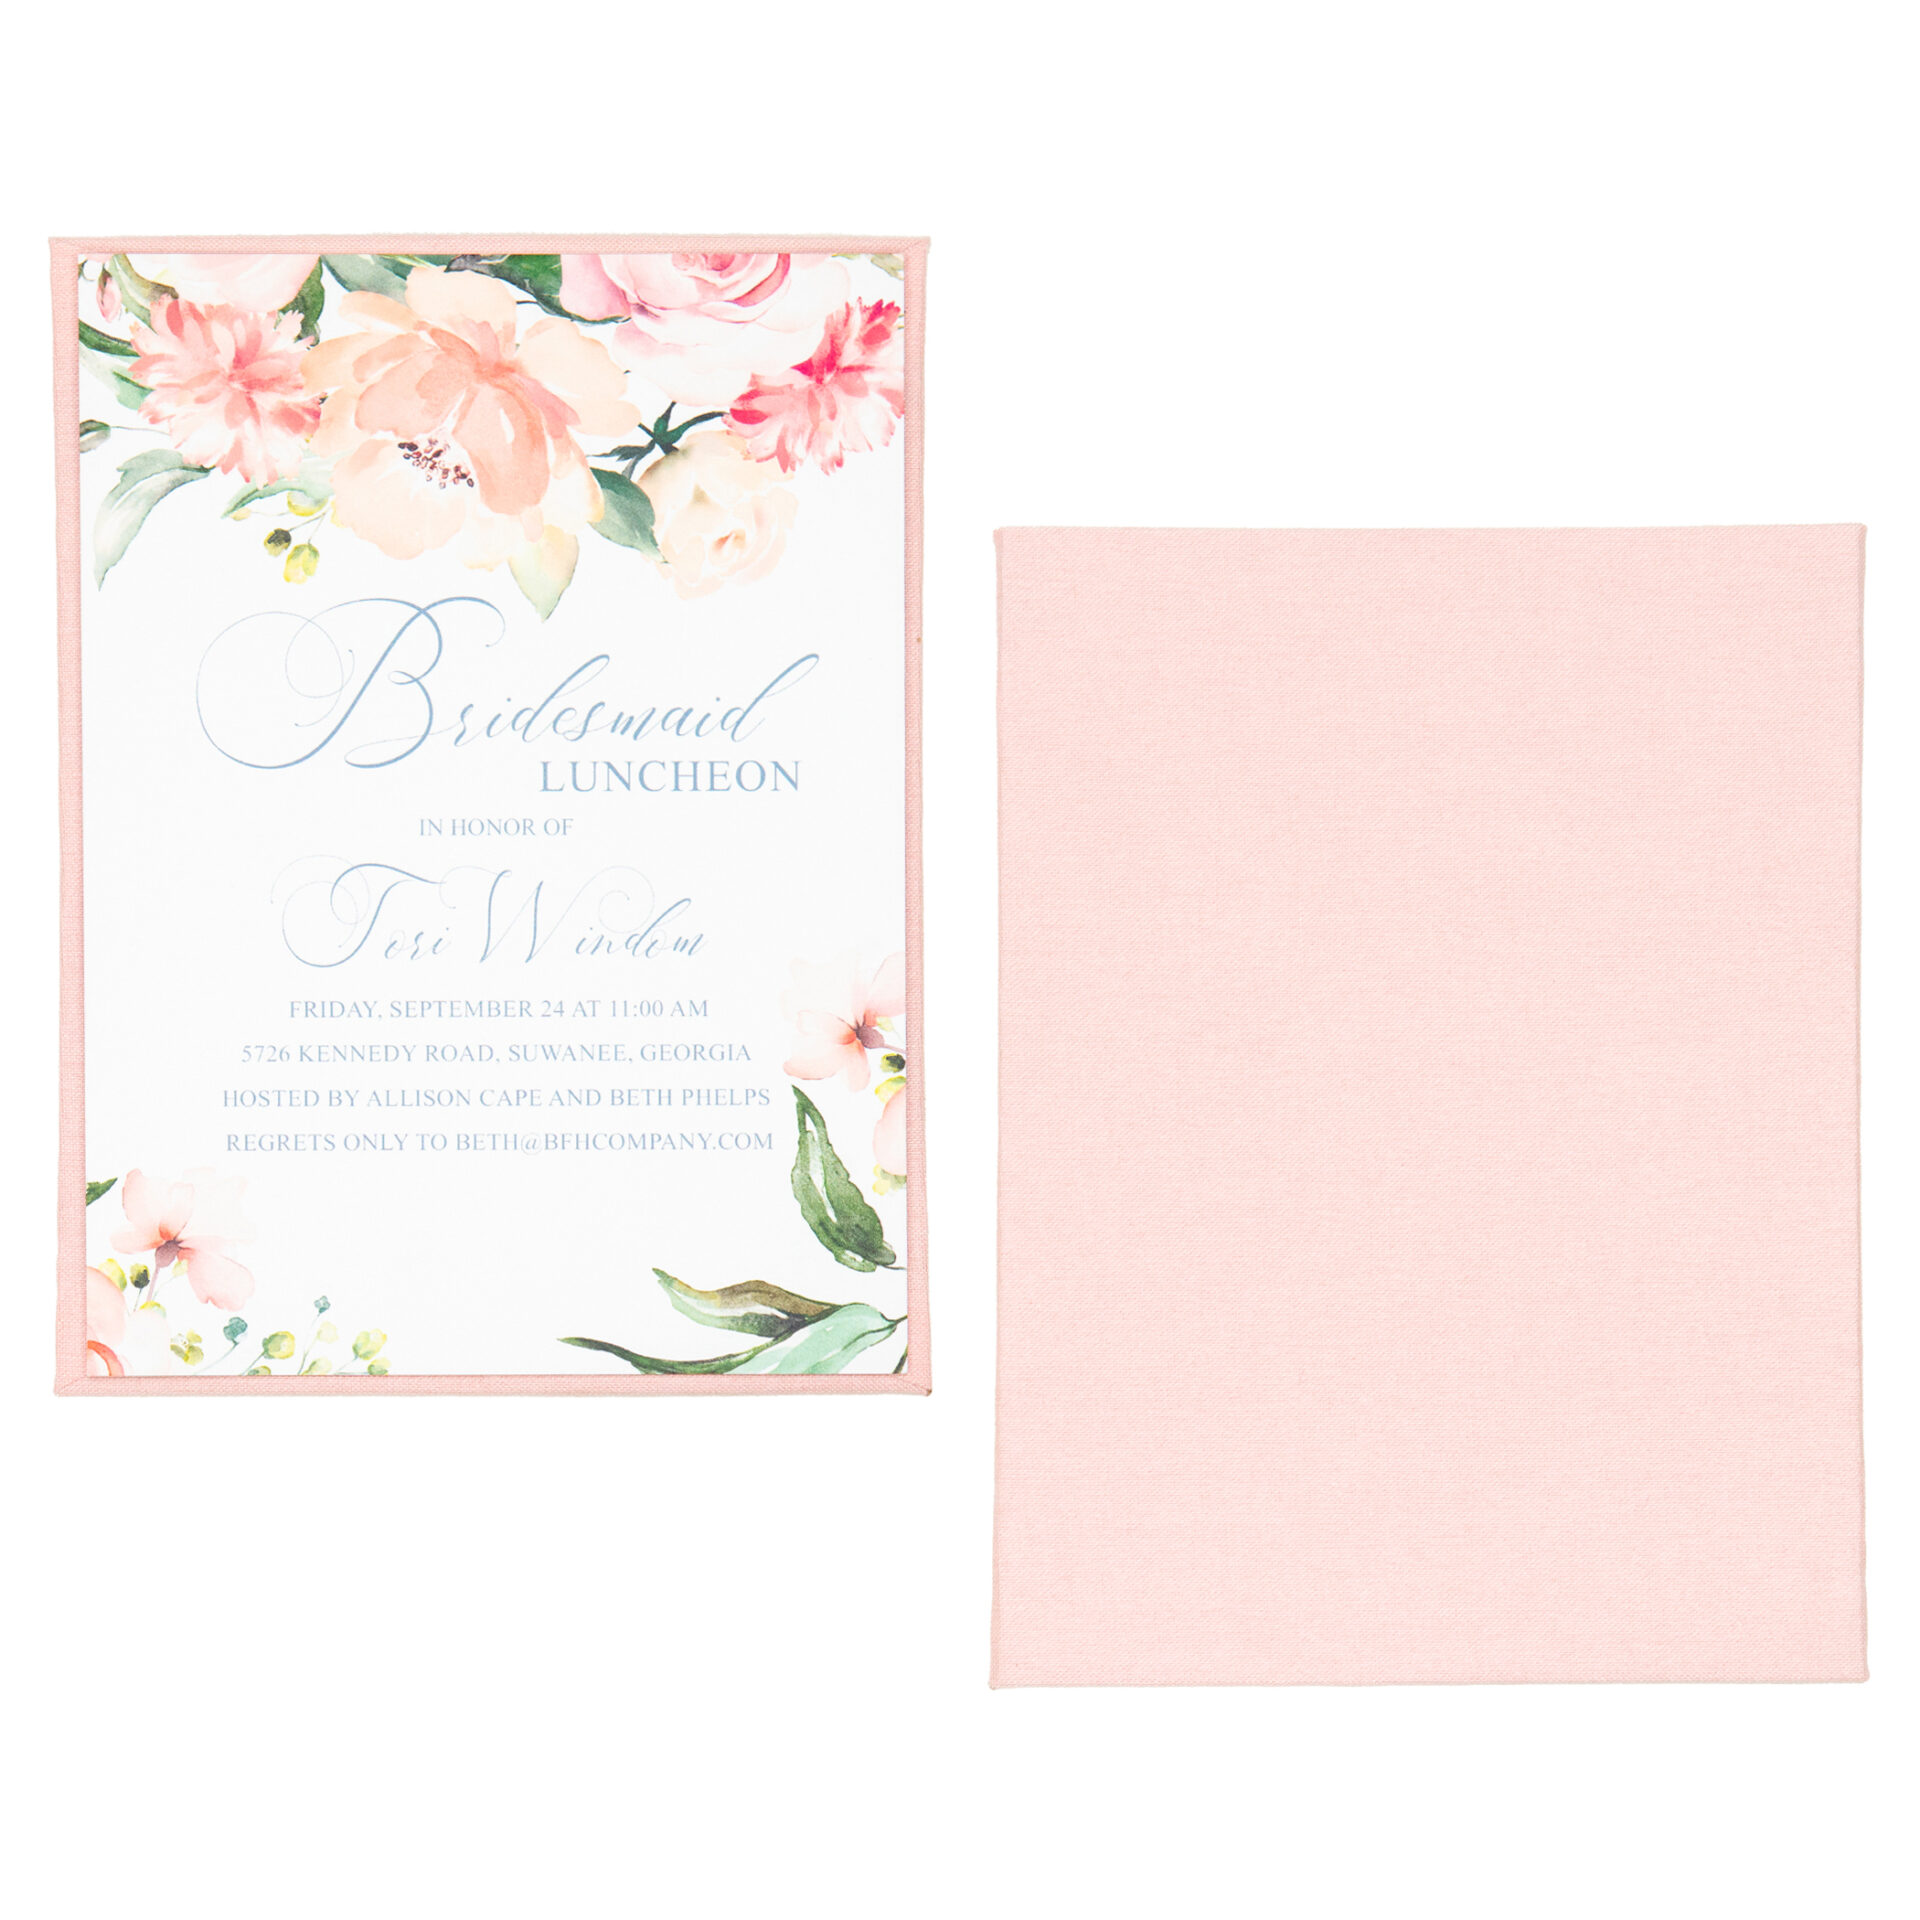 Linen Invitation Panel (Panel Only) - Cotton Candy